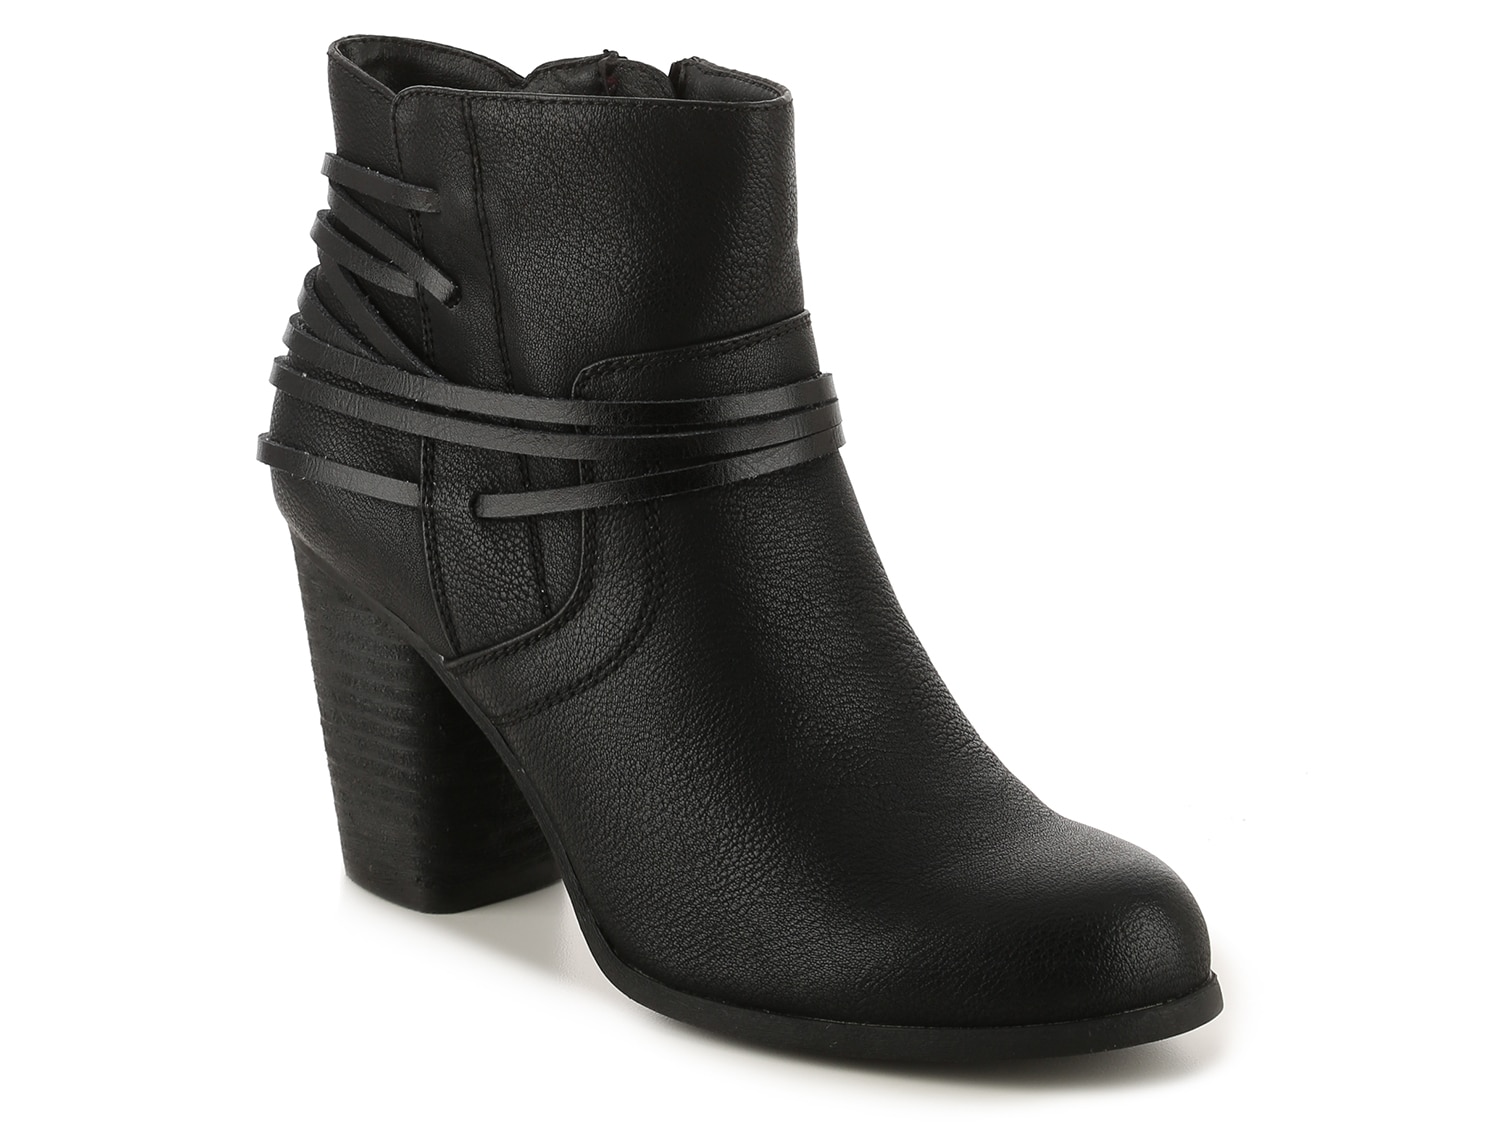 Madden Girl Denice Bootie - Free Shipping | DSW